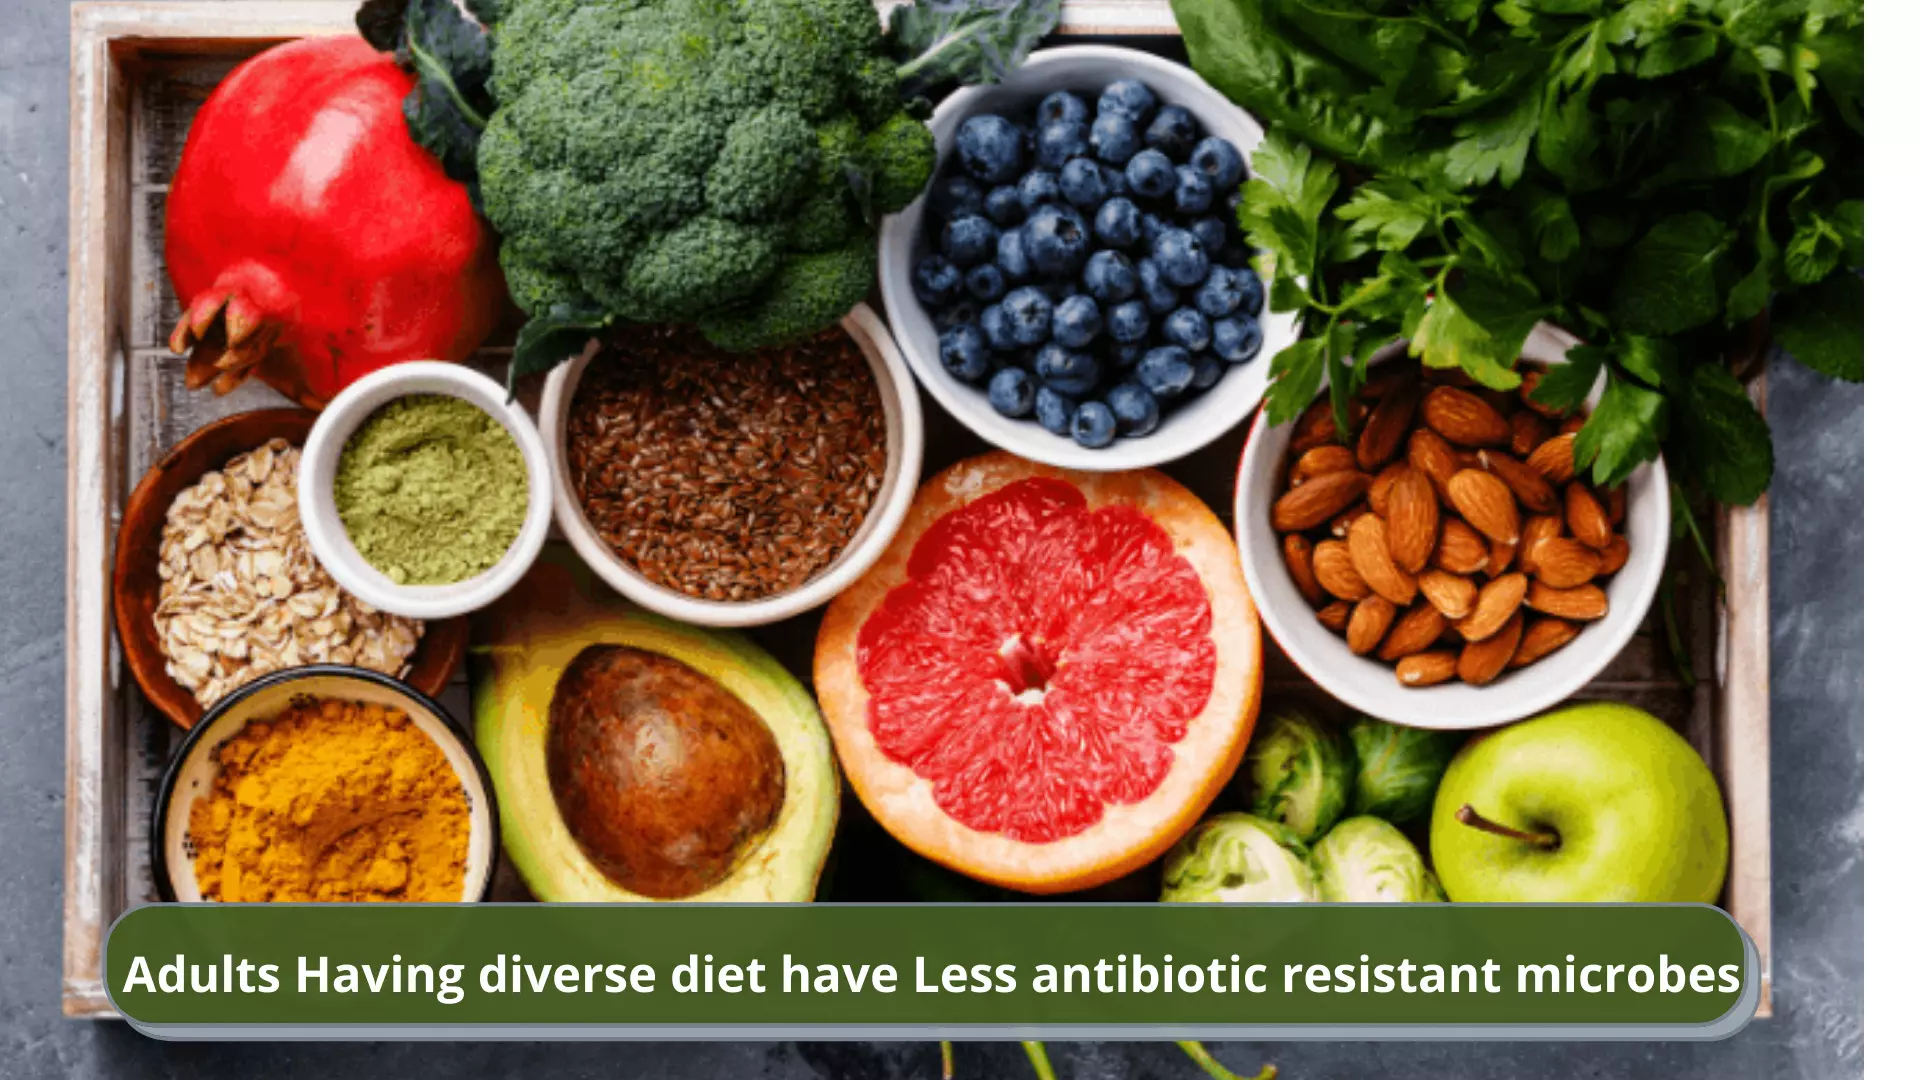 Adults Having diverse diet have Less antibiotic resistant microbes